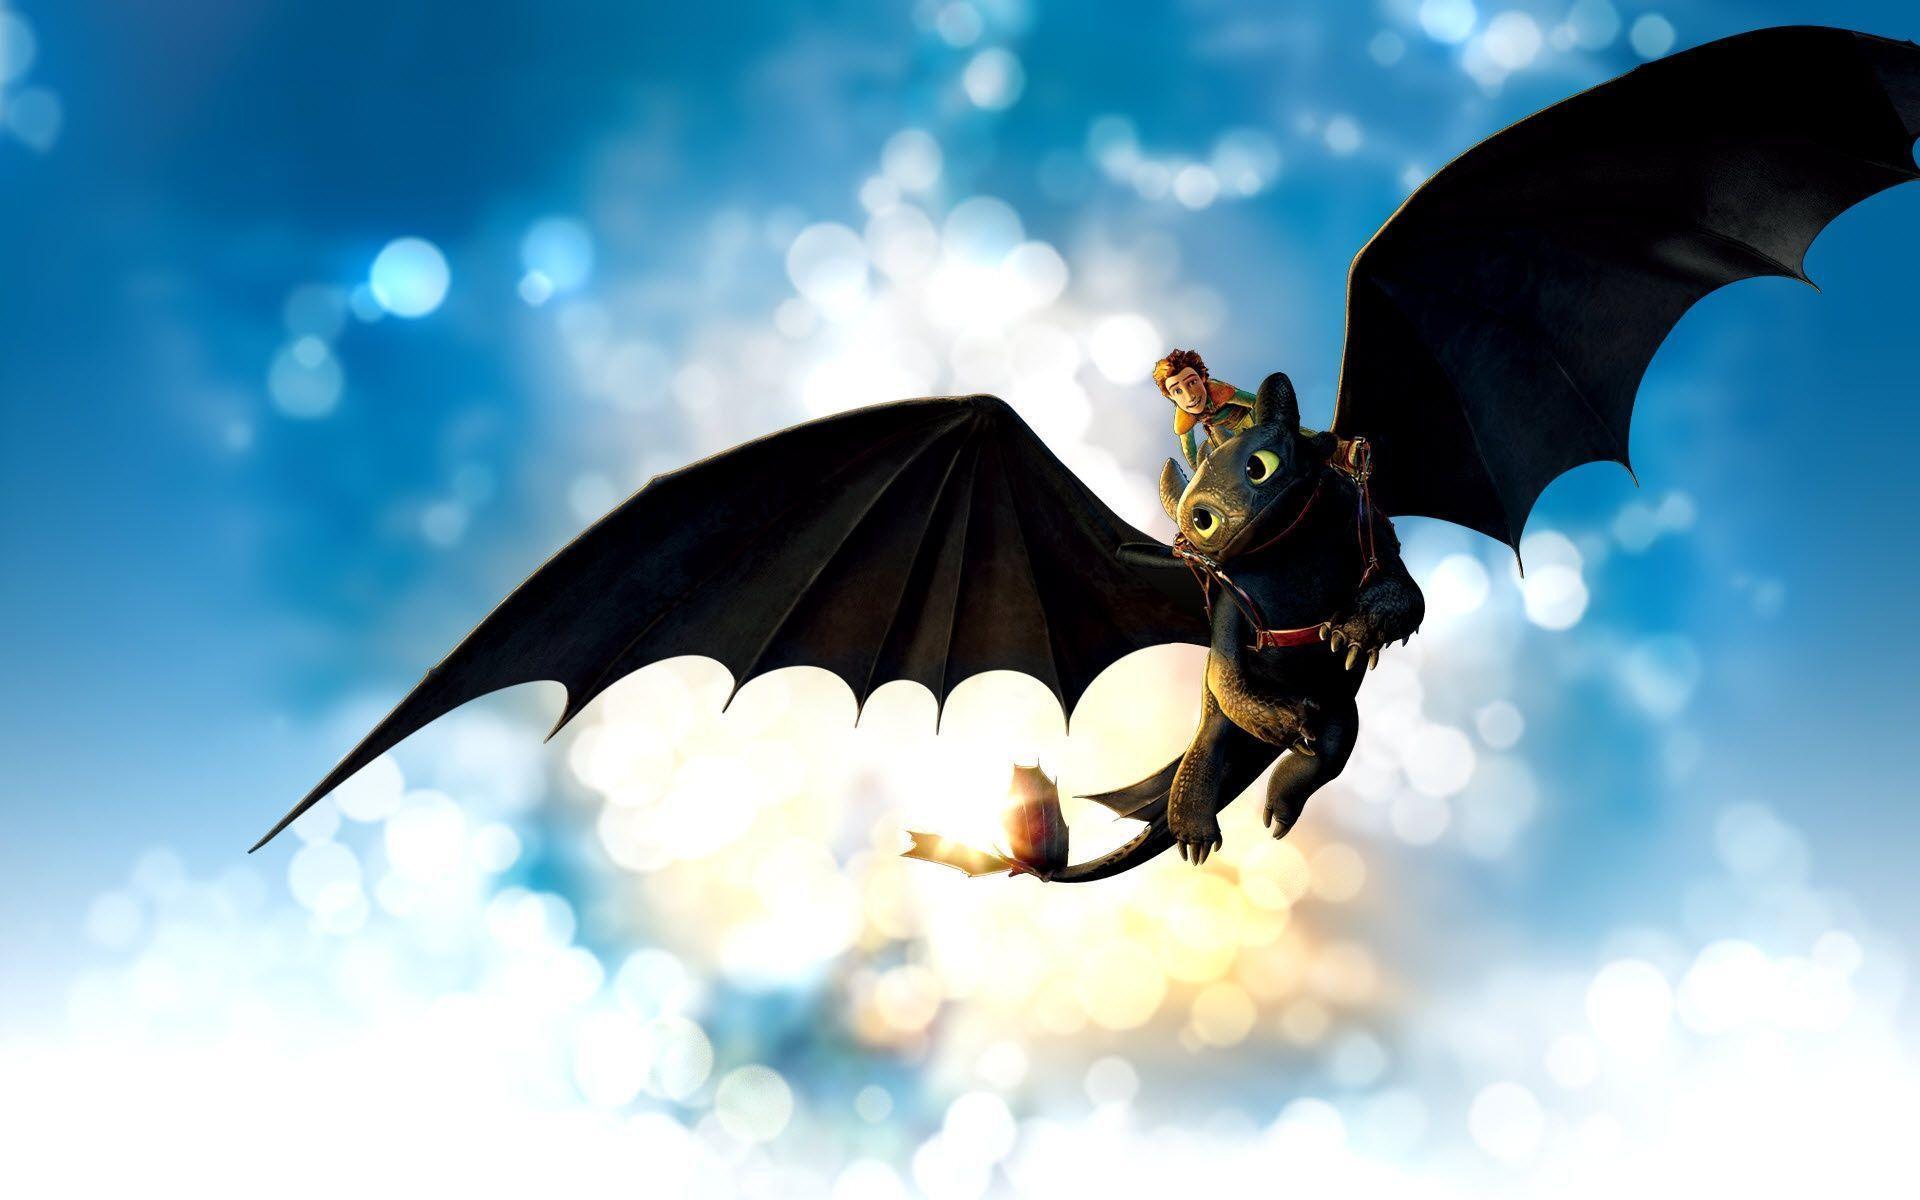 Toothless Dragon Wallpaper Image & Picture